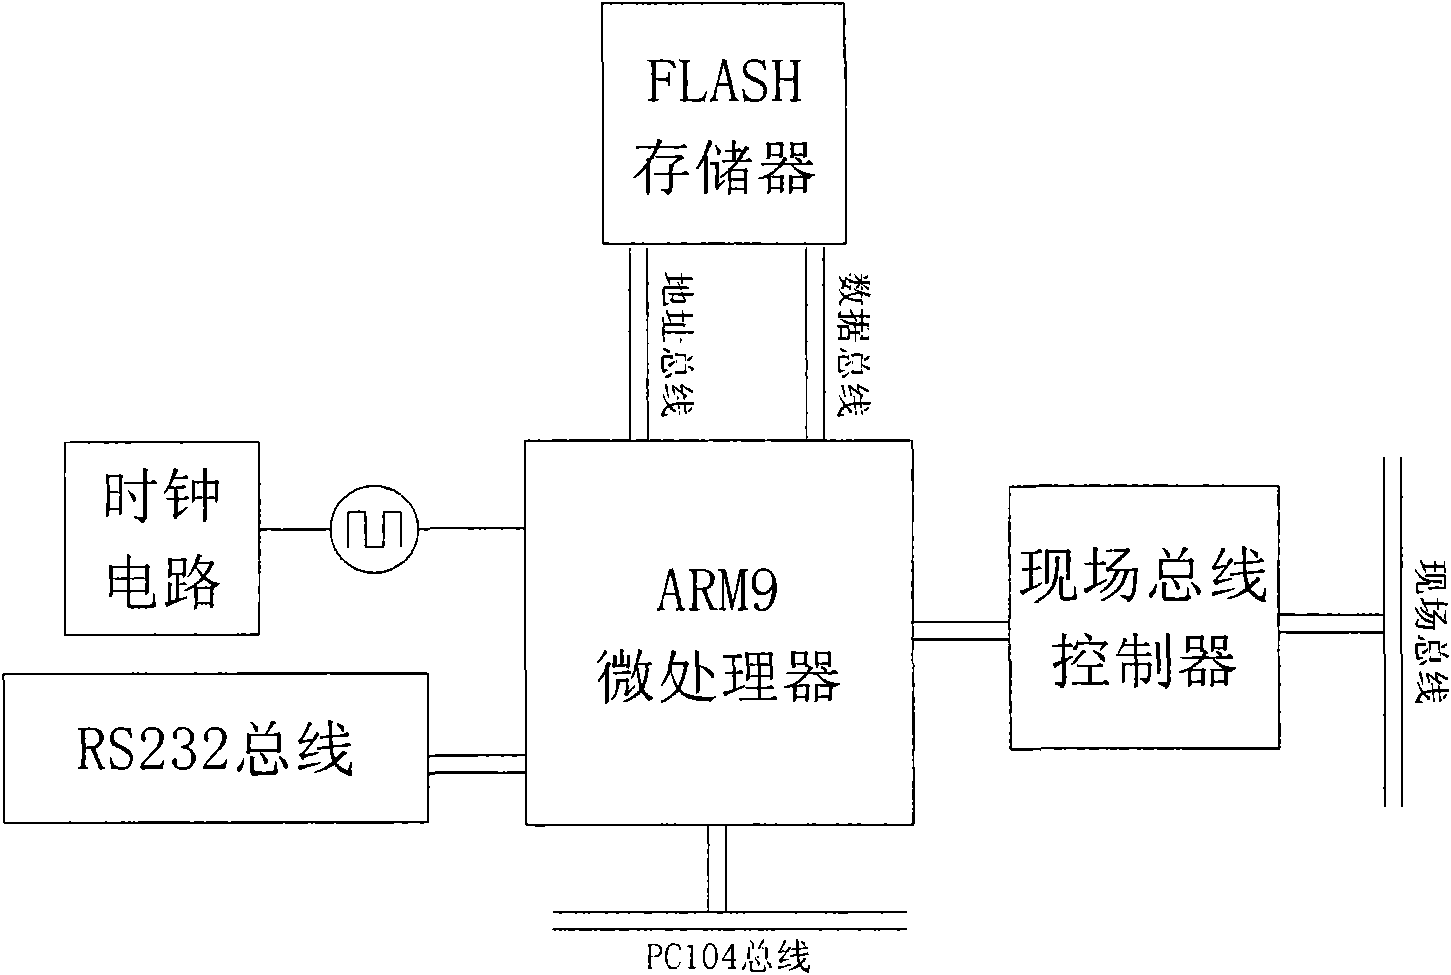 Two-arm inspection robot control system based on field bus